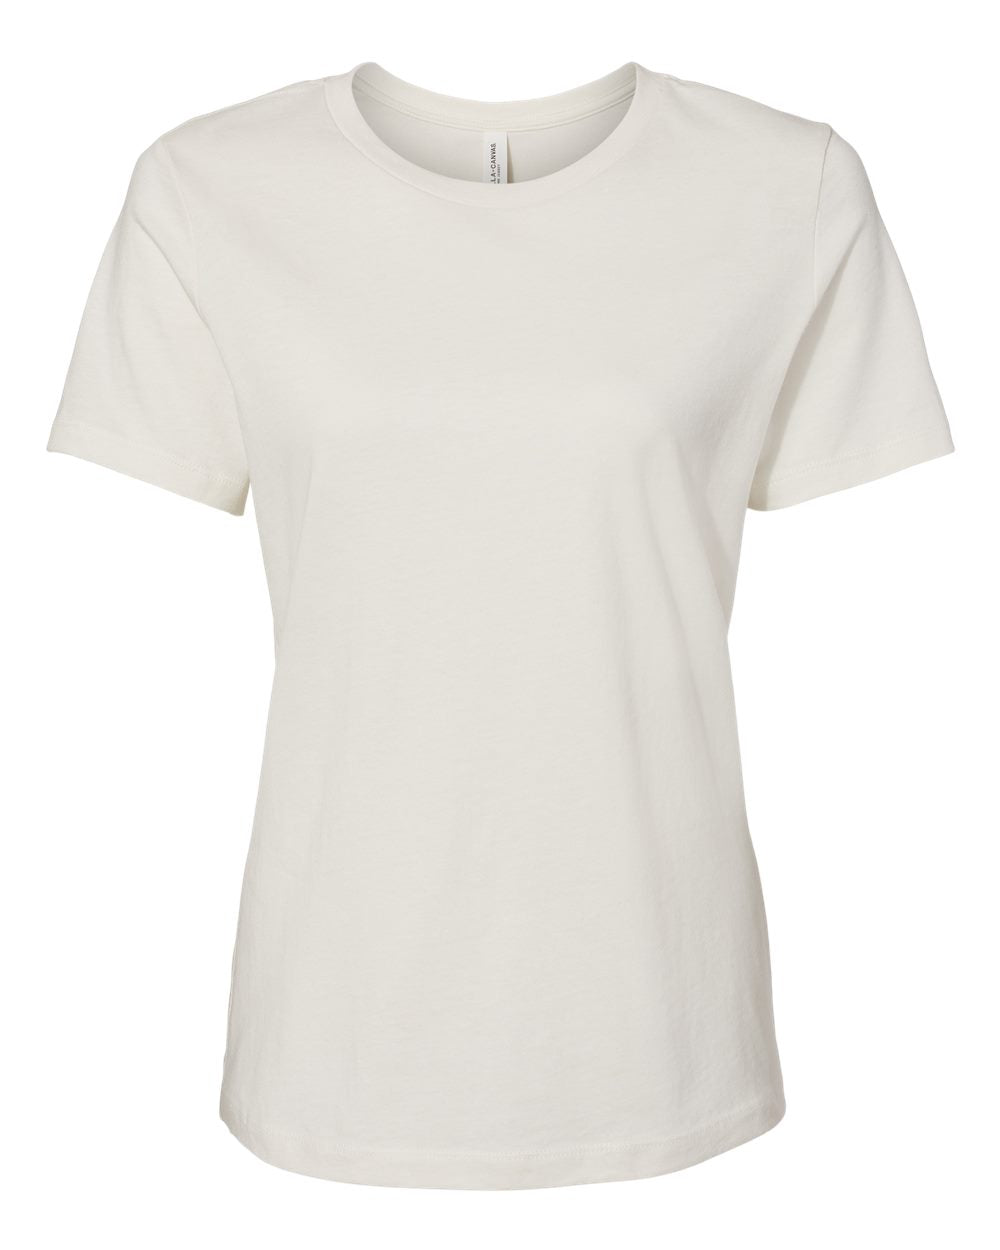 bella+canvas womens relaxed tee vintage white